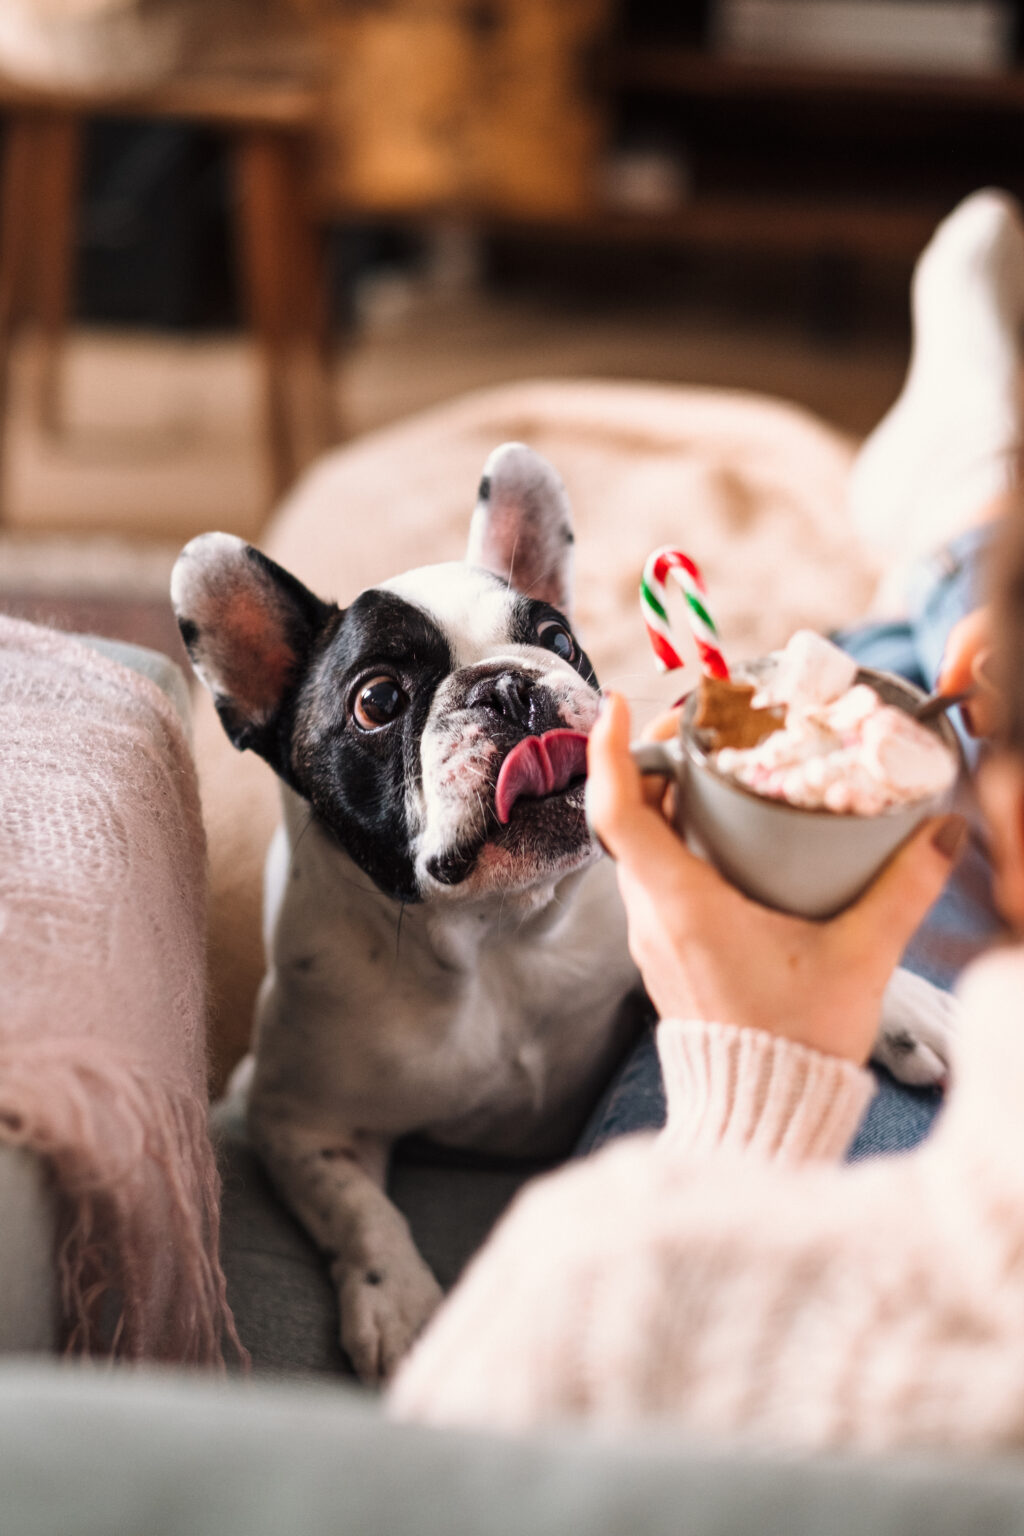 French Bulldog trying to steal Christmas latte with marshmallows 6 - free stock photo